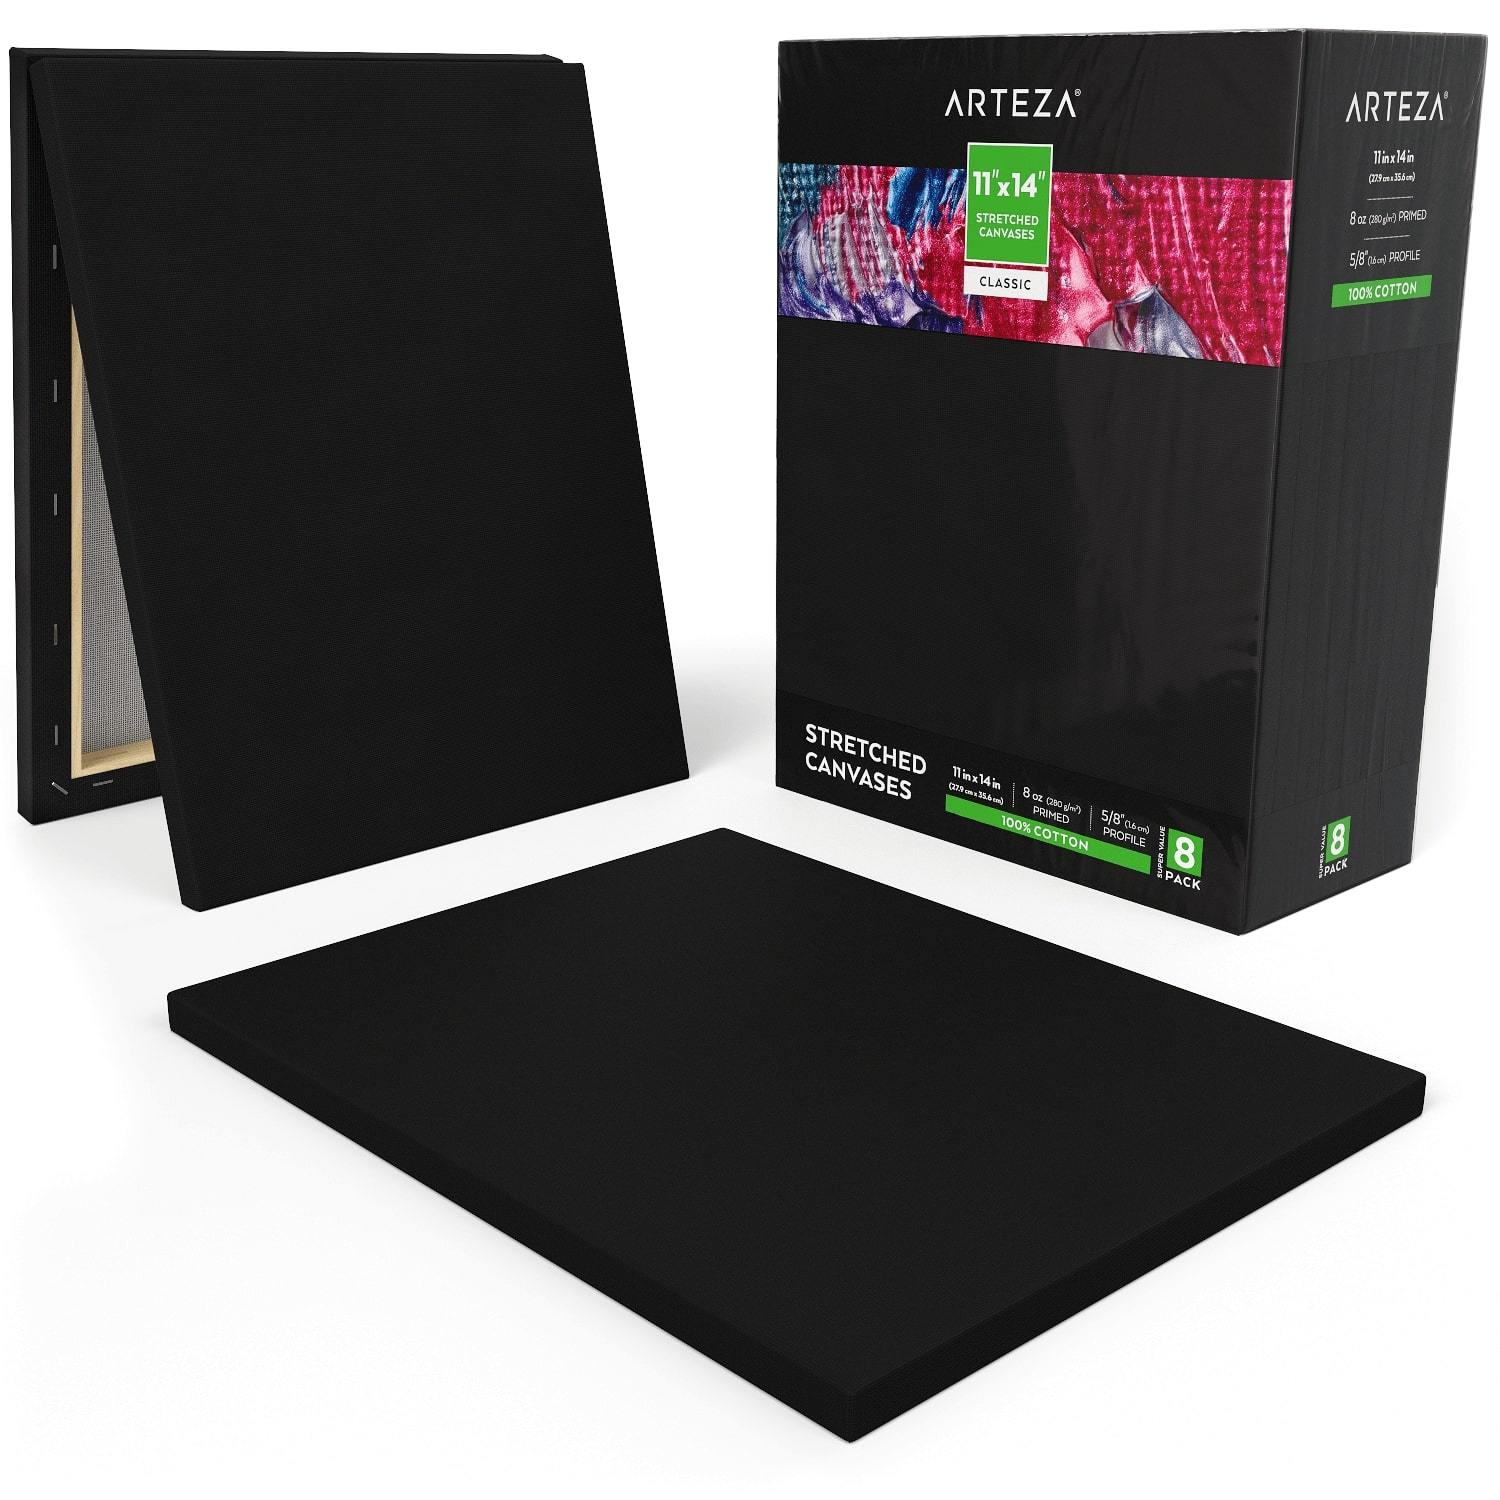 2-1/2 Stretched Black Cotton Canvas 16X20: Box of 5